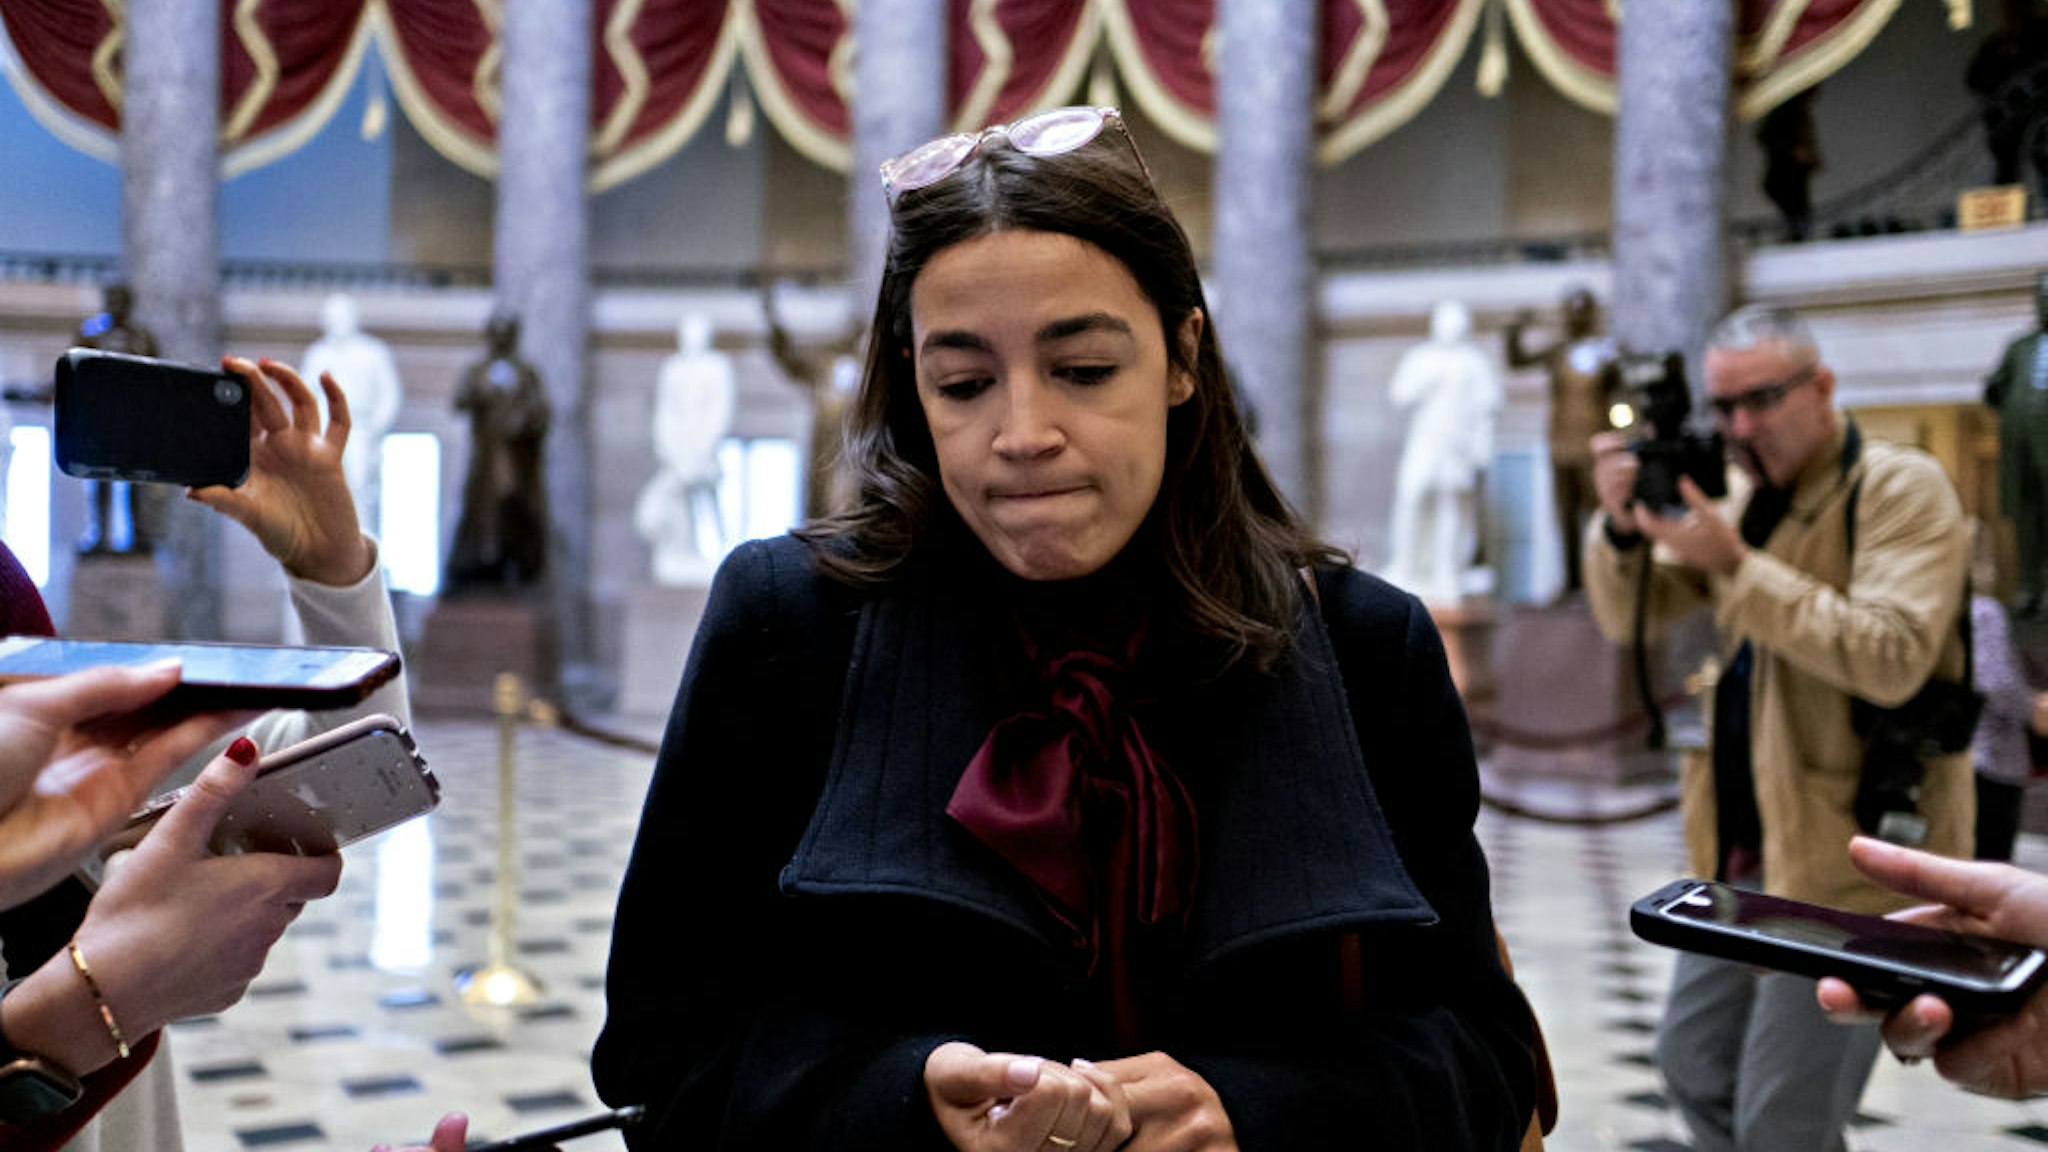 Representative Alexandria Ocasio-Cortez, a Democrat from New York, pauses while speaking to members of the media in Statuary Hall of the U.S. Capitol in Washington, D.C., U.S., on Wednesday, Dec. 18, 2019.